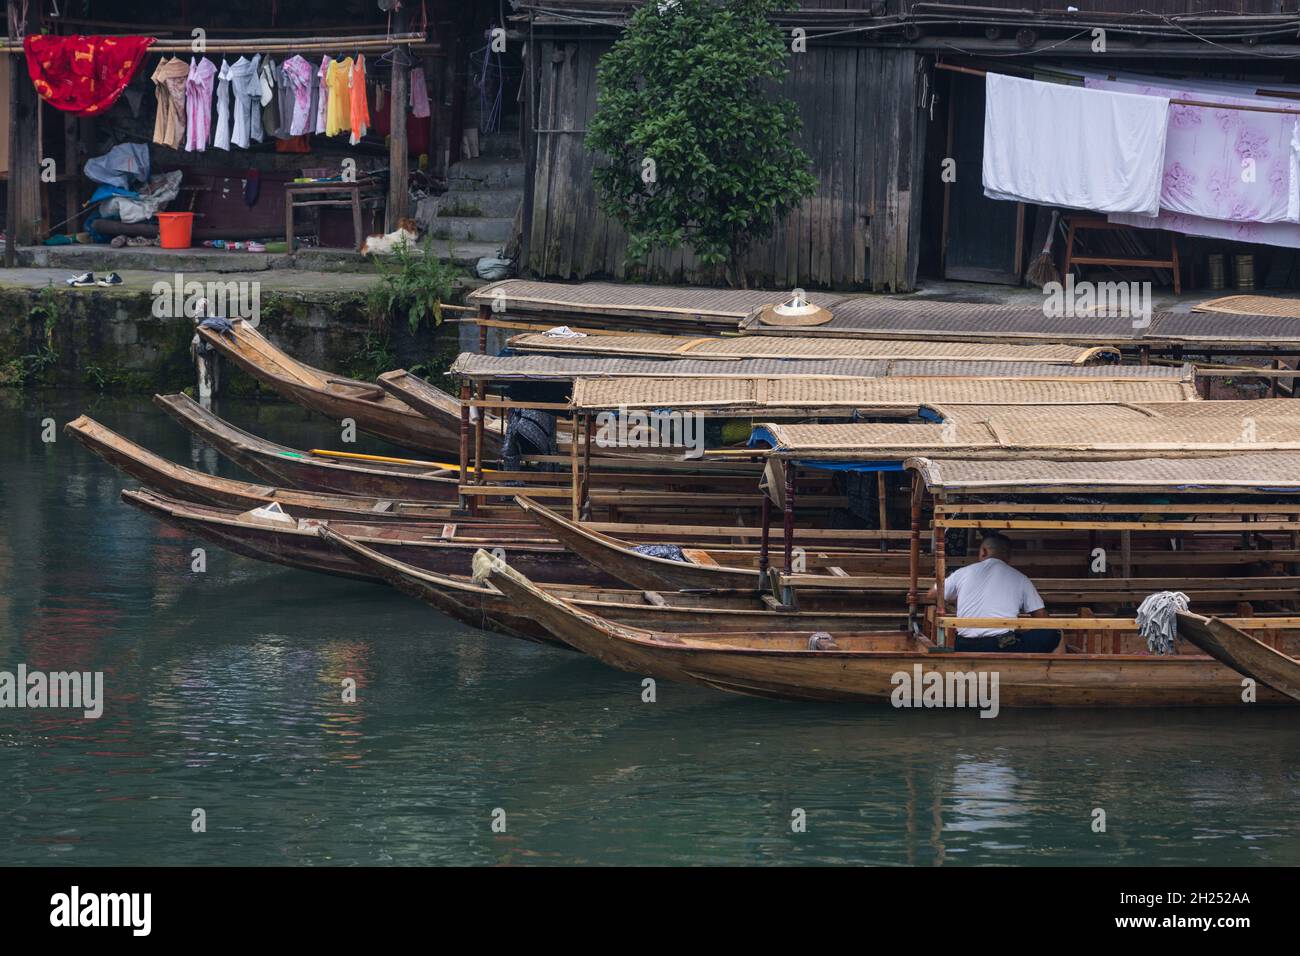 A boatman sits in his covered tour boat docked along the Tuojiang River in Fenghuang, China. Stock Photo